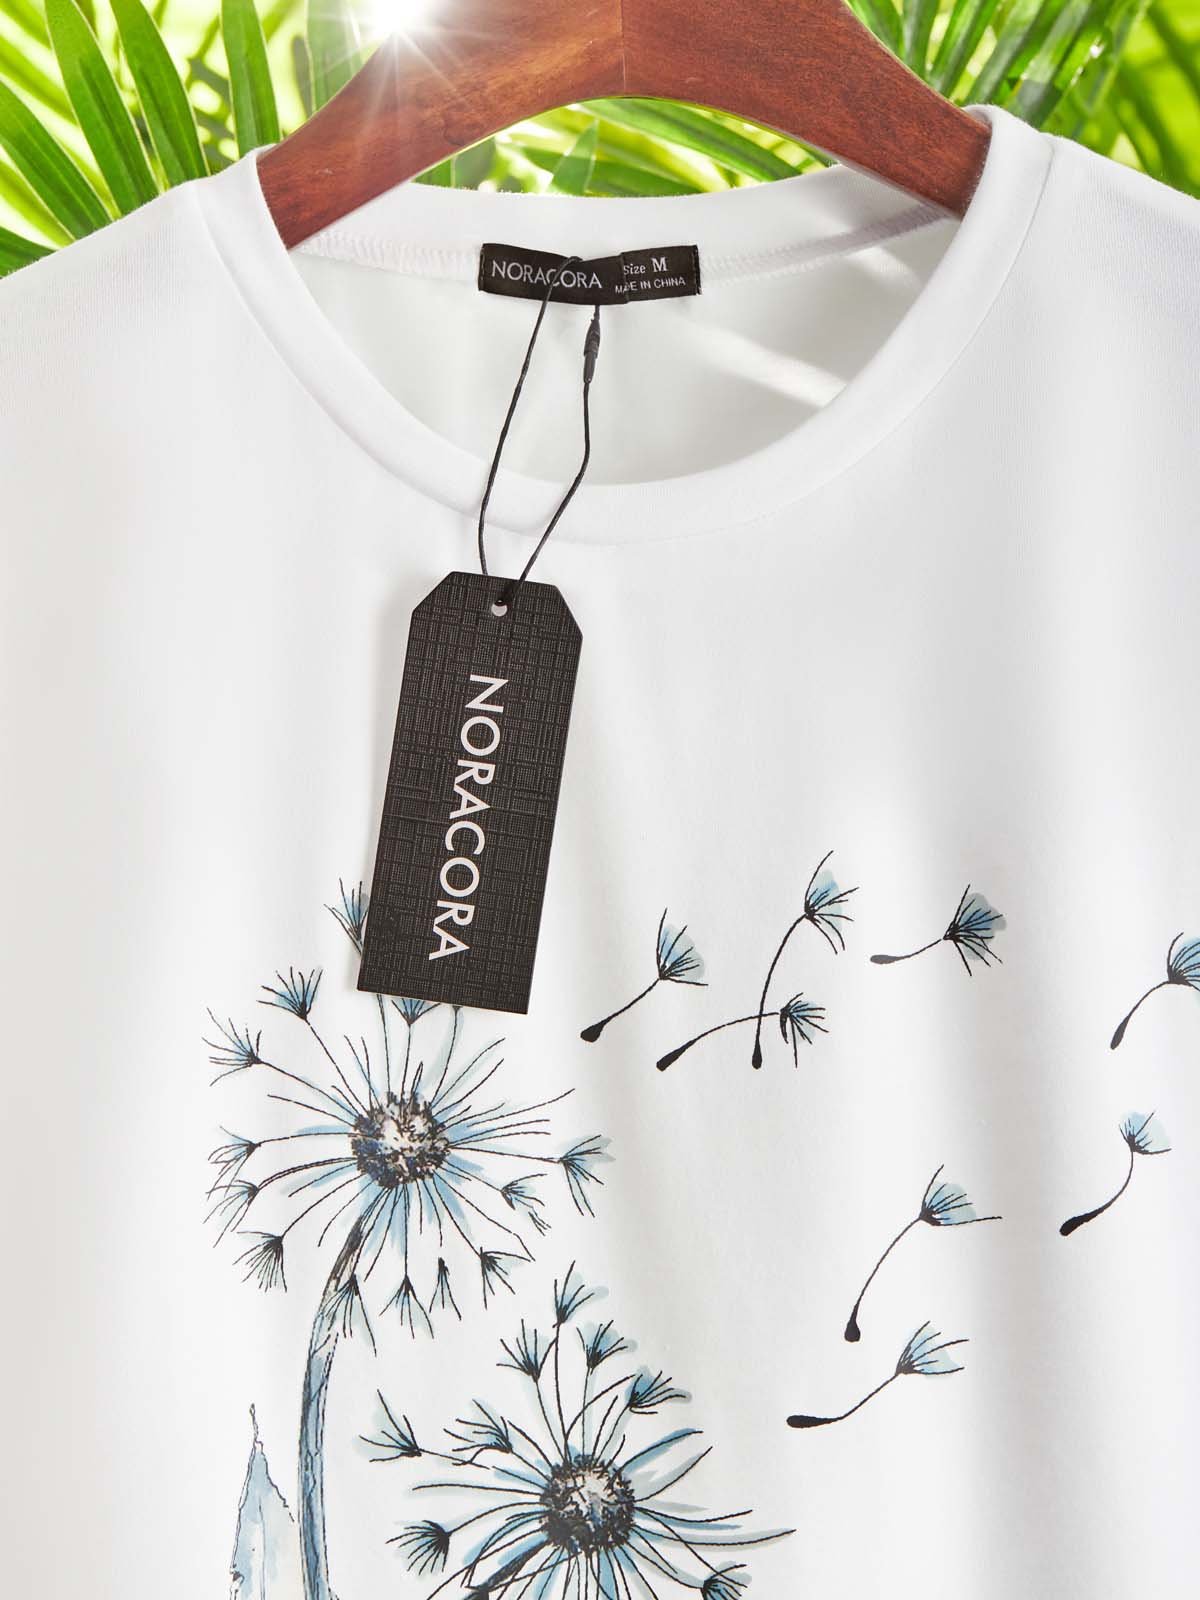 Casual Dandelion Printed Short Sleeve Round Neck Top Tunic T-Shirt